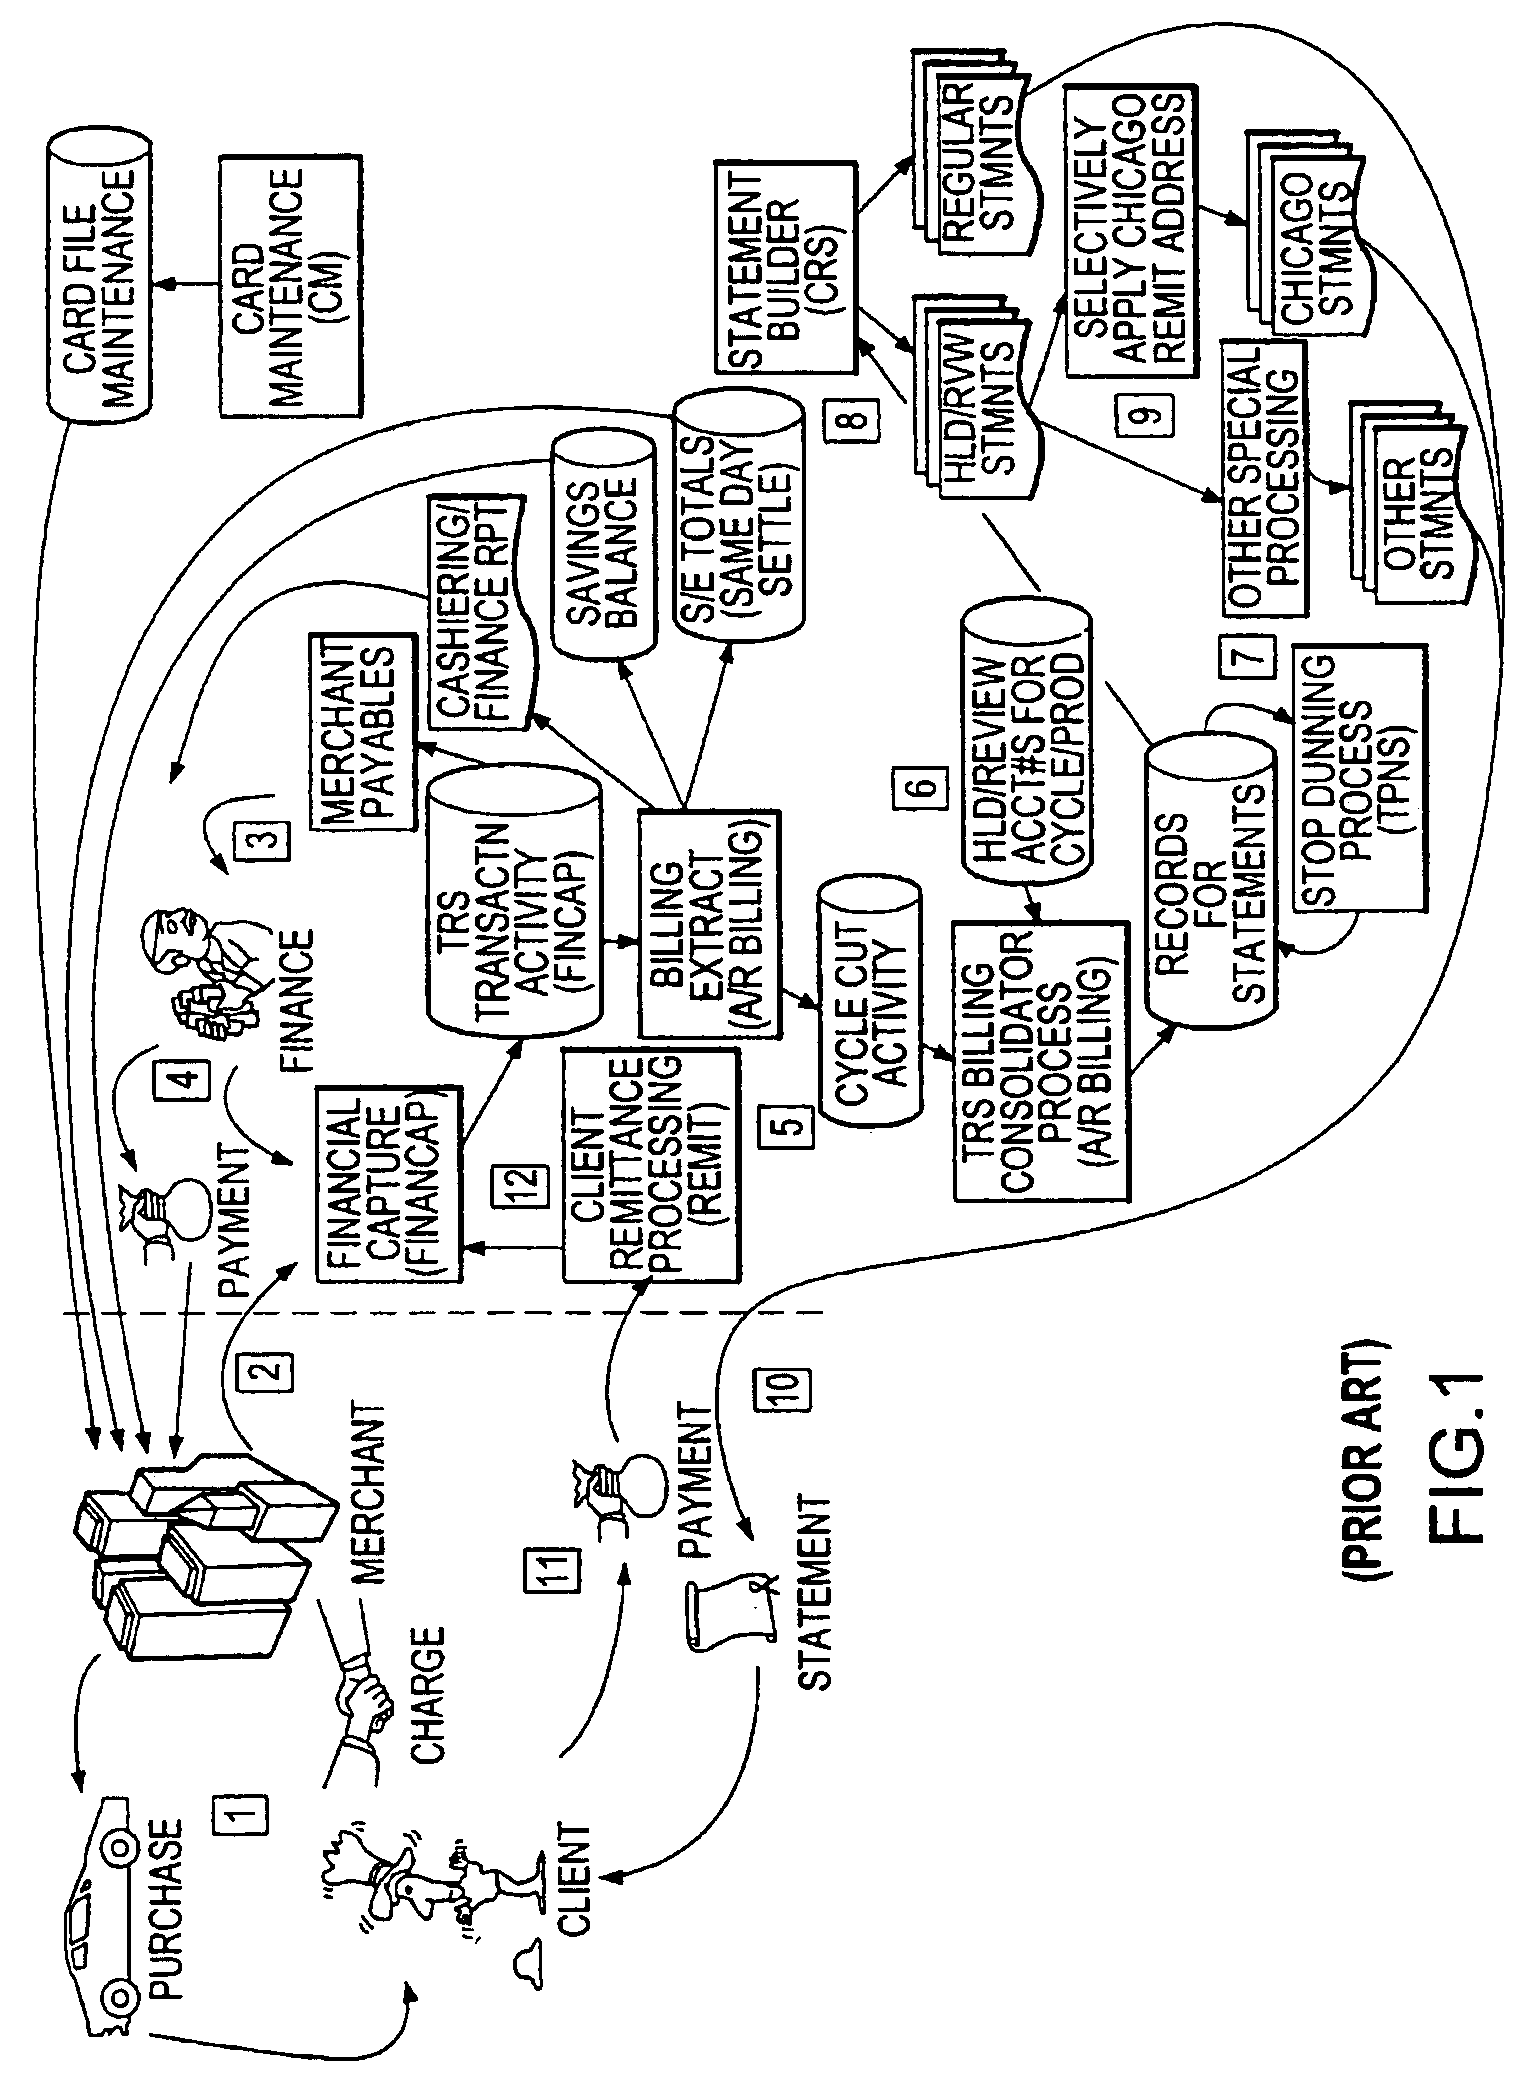 System, method, and computer program product for saving and investing through use of transaction cards